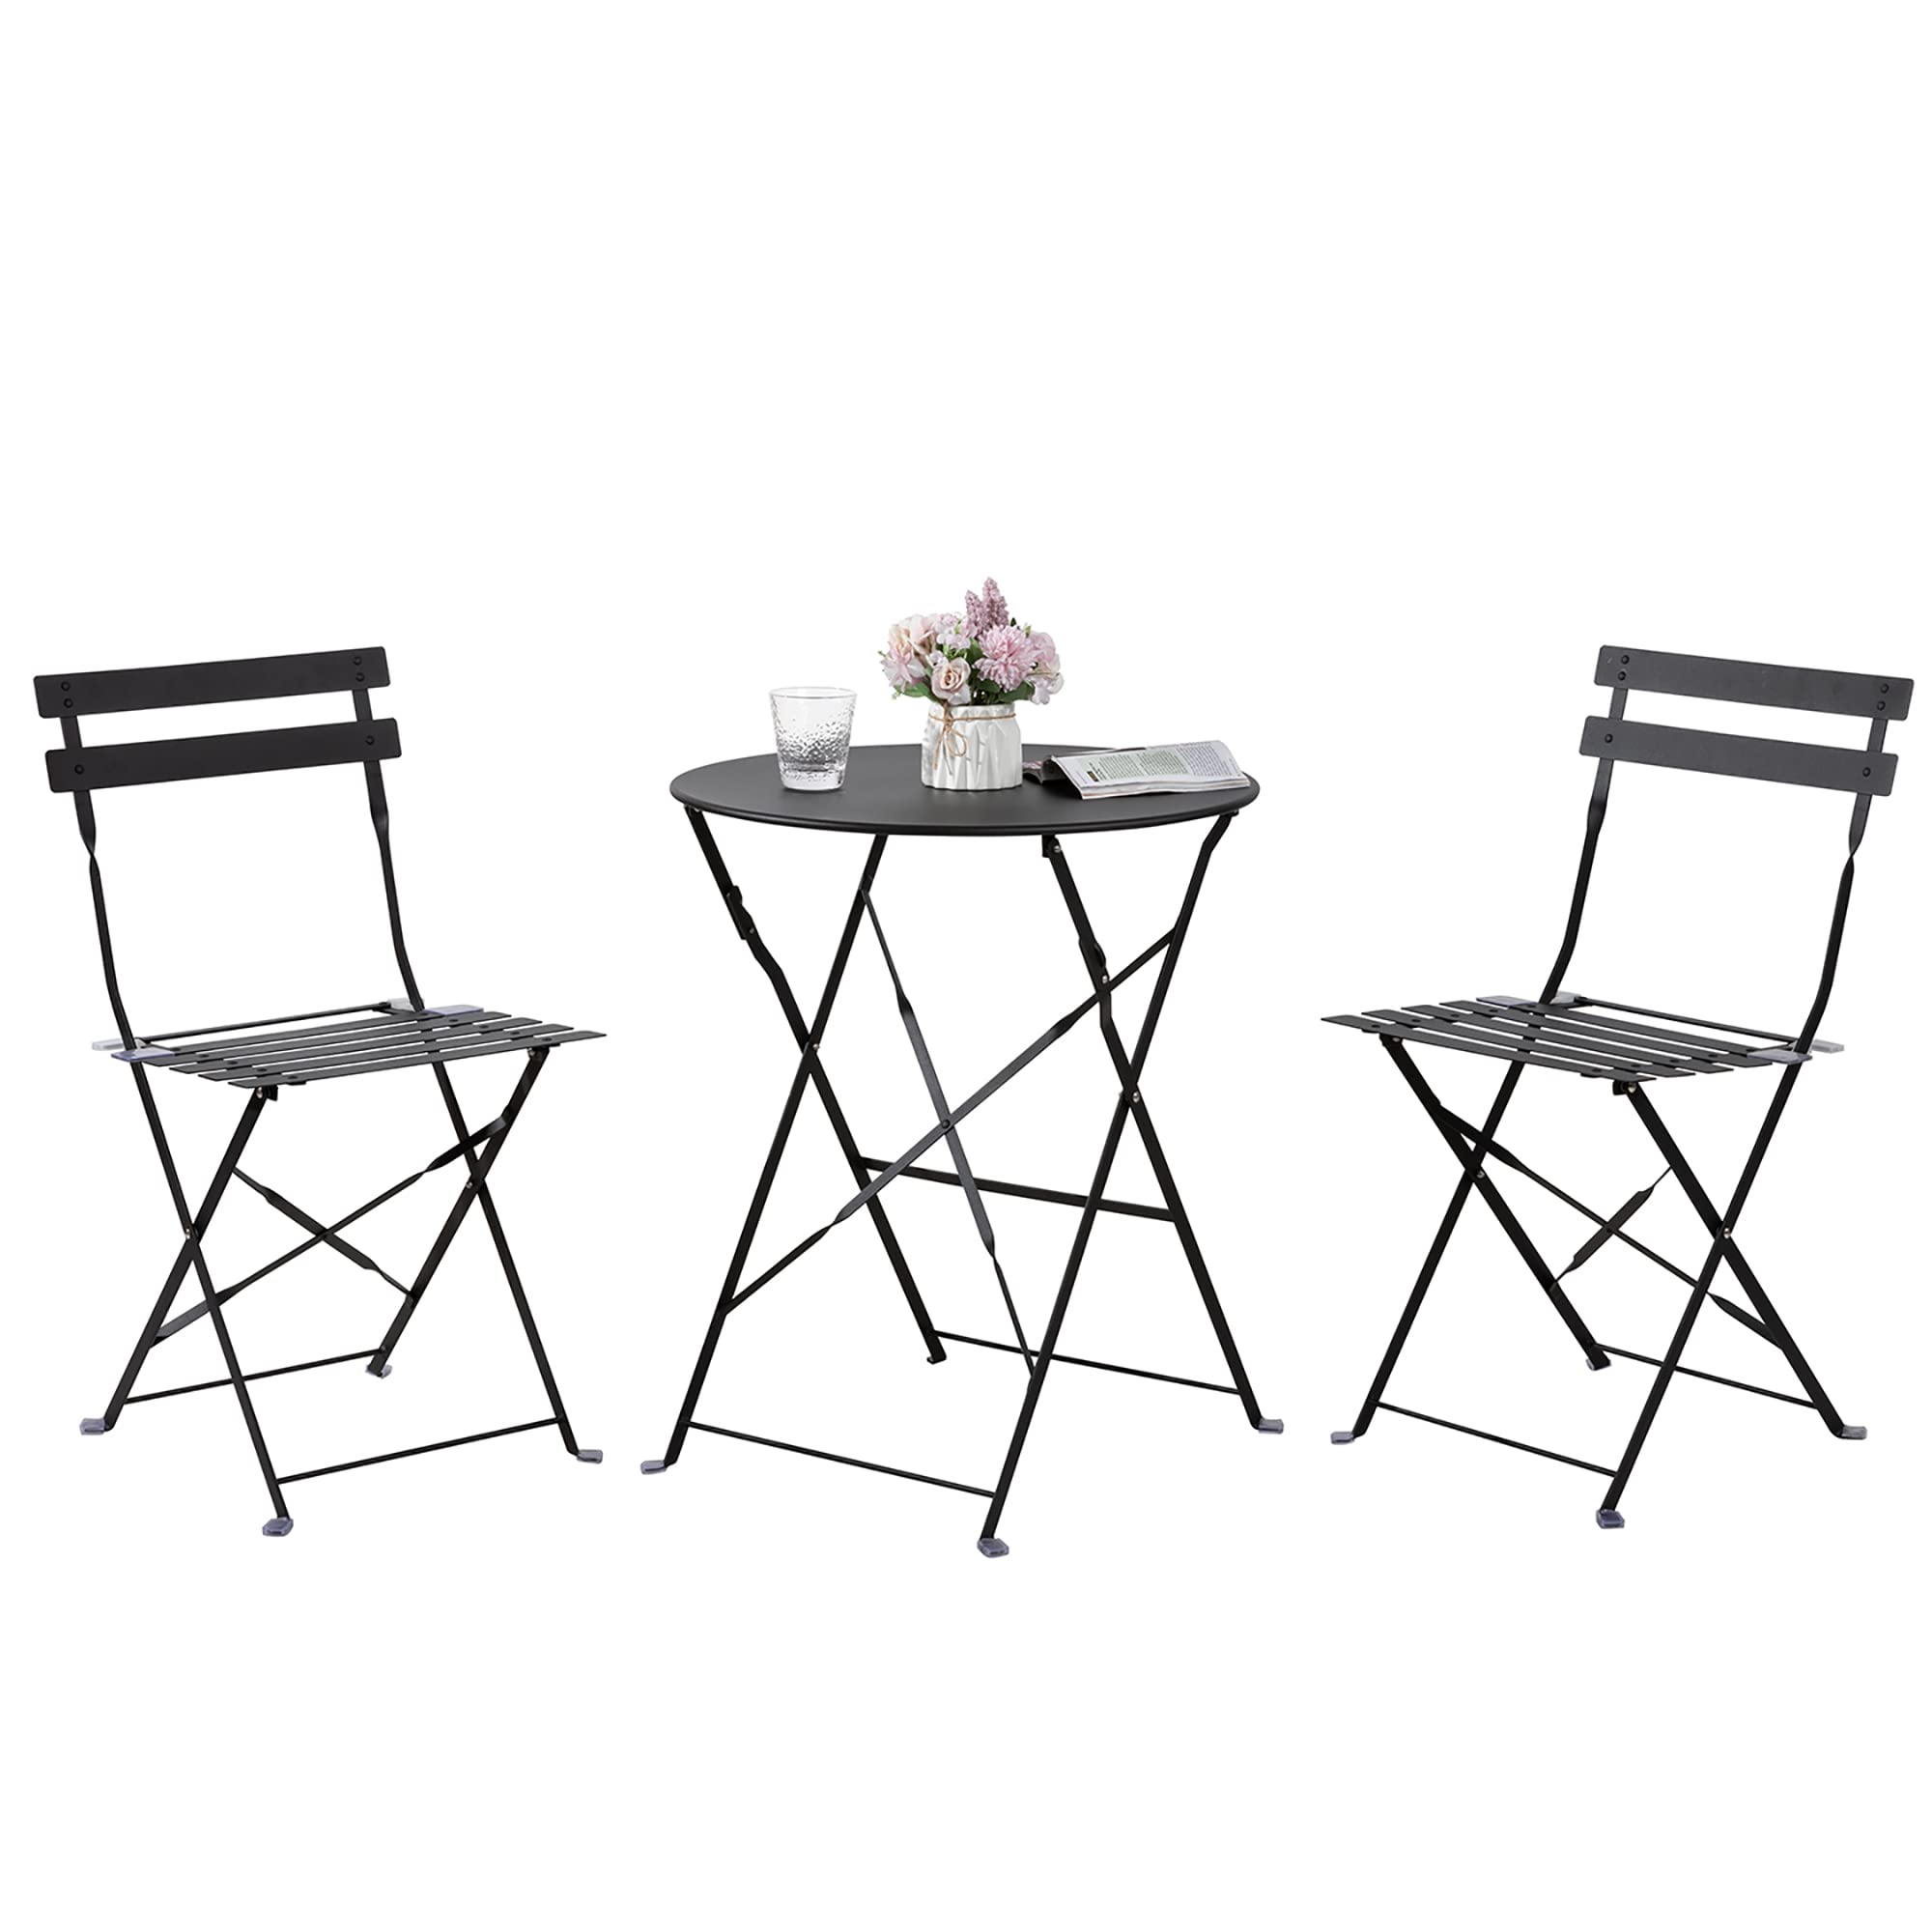 3-Piece Powder-Coated Iron Bistro Set of Foldable Garden Table and Chairs